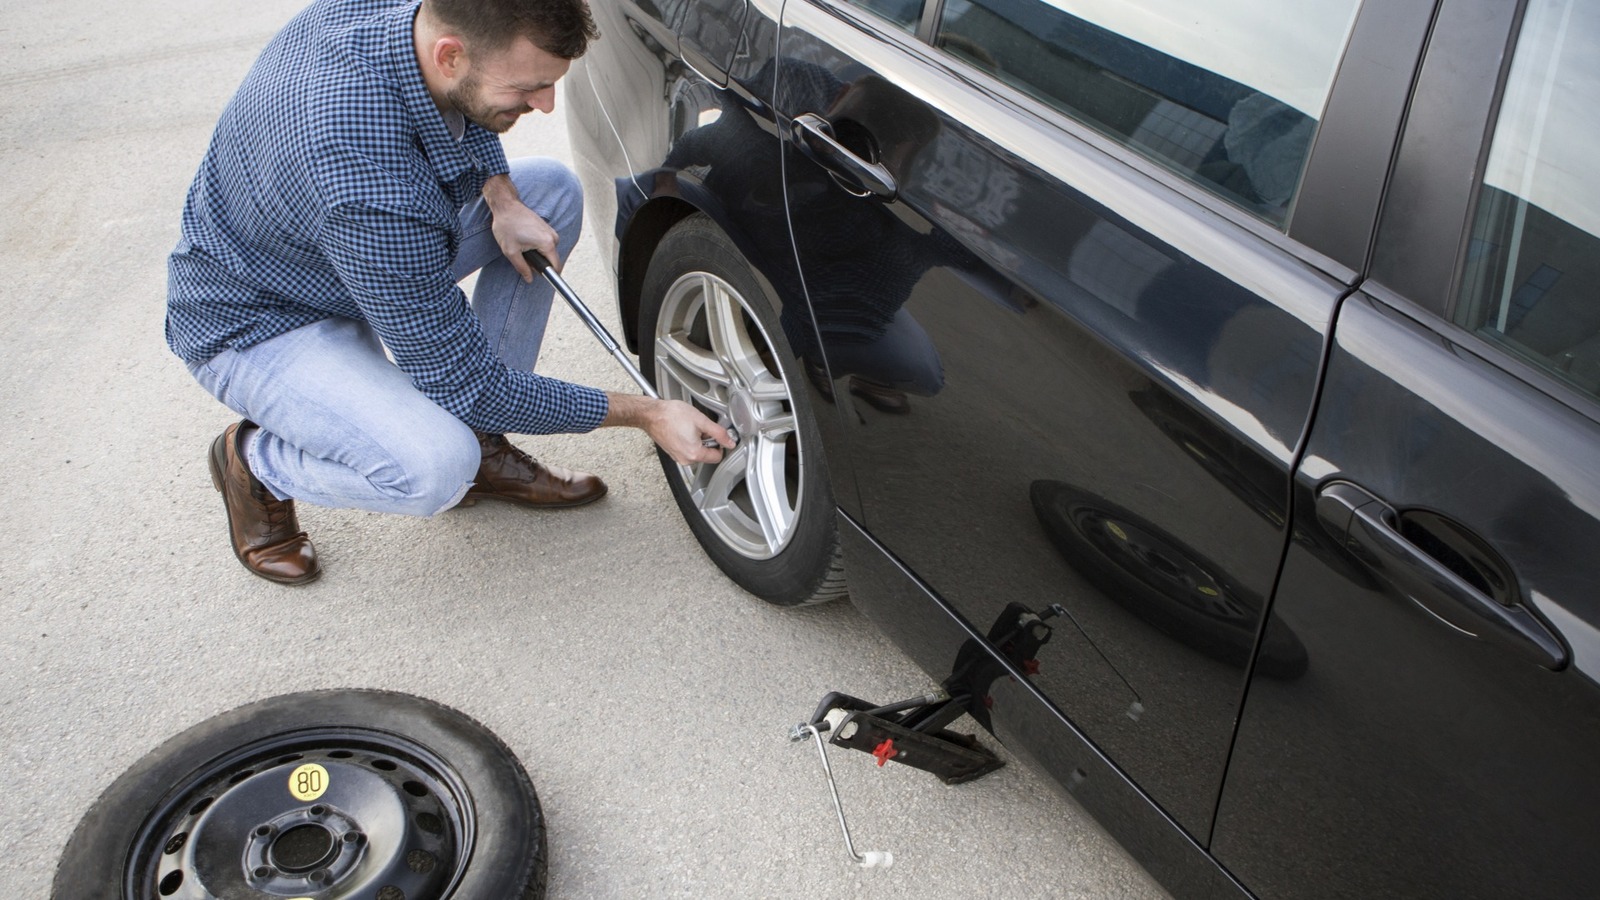 How To Fix A Flat Tire At Home, And What You'll Need